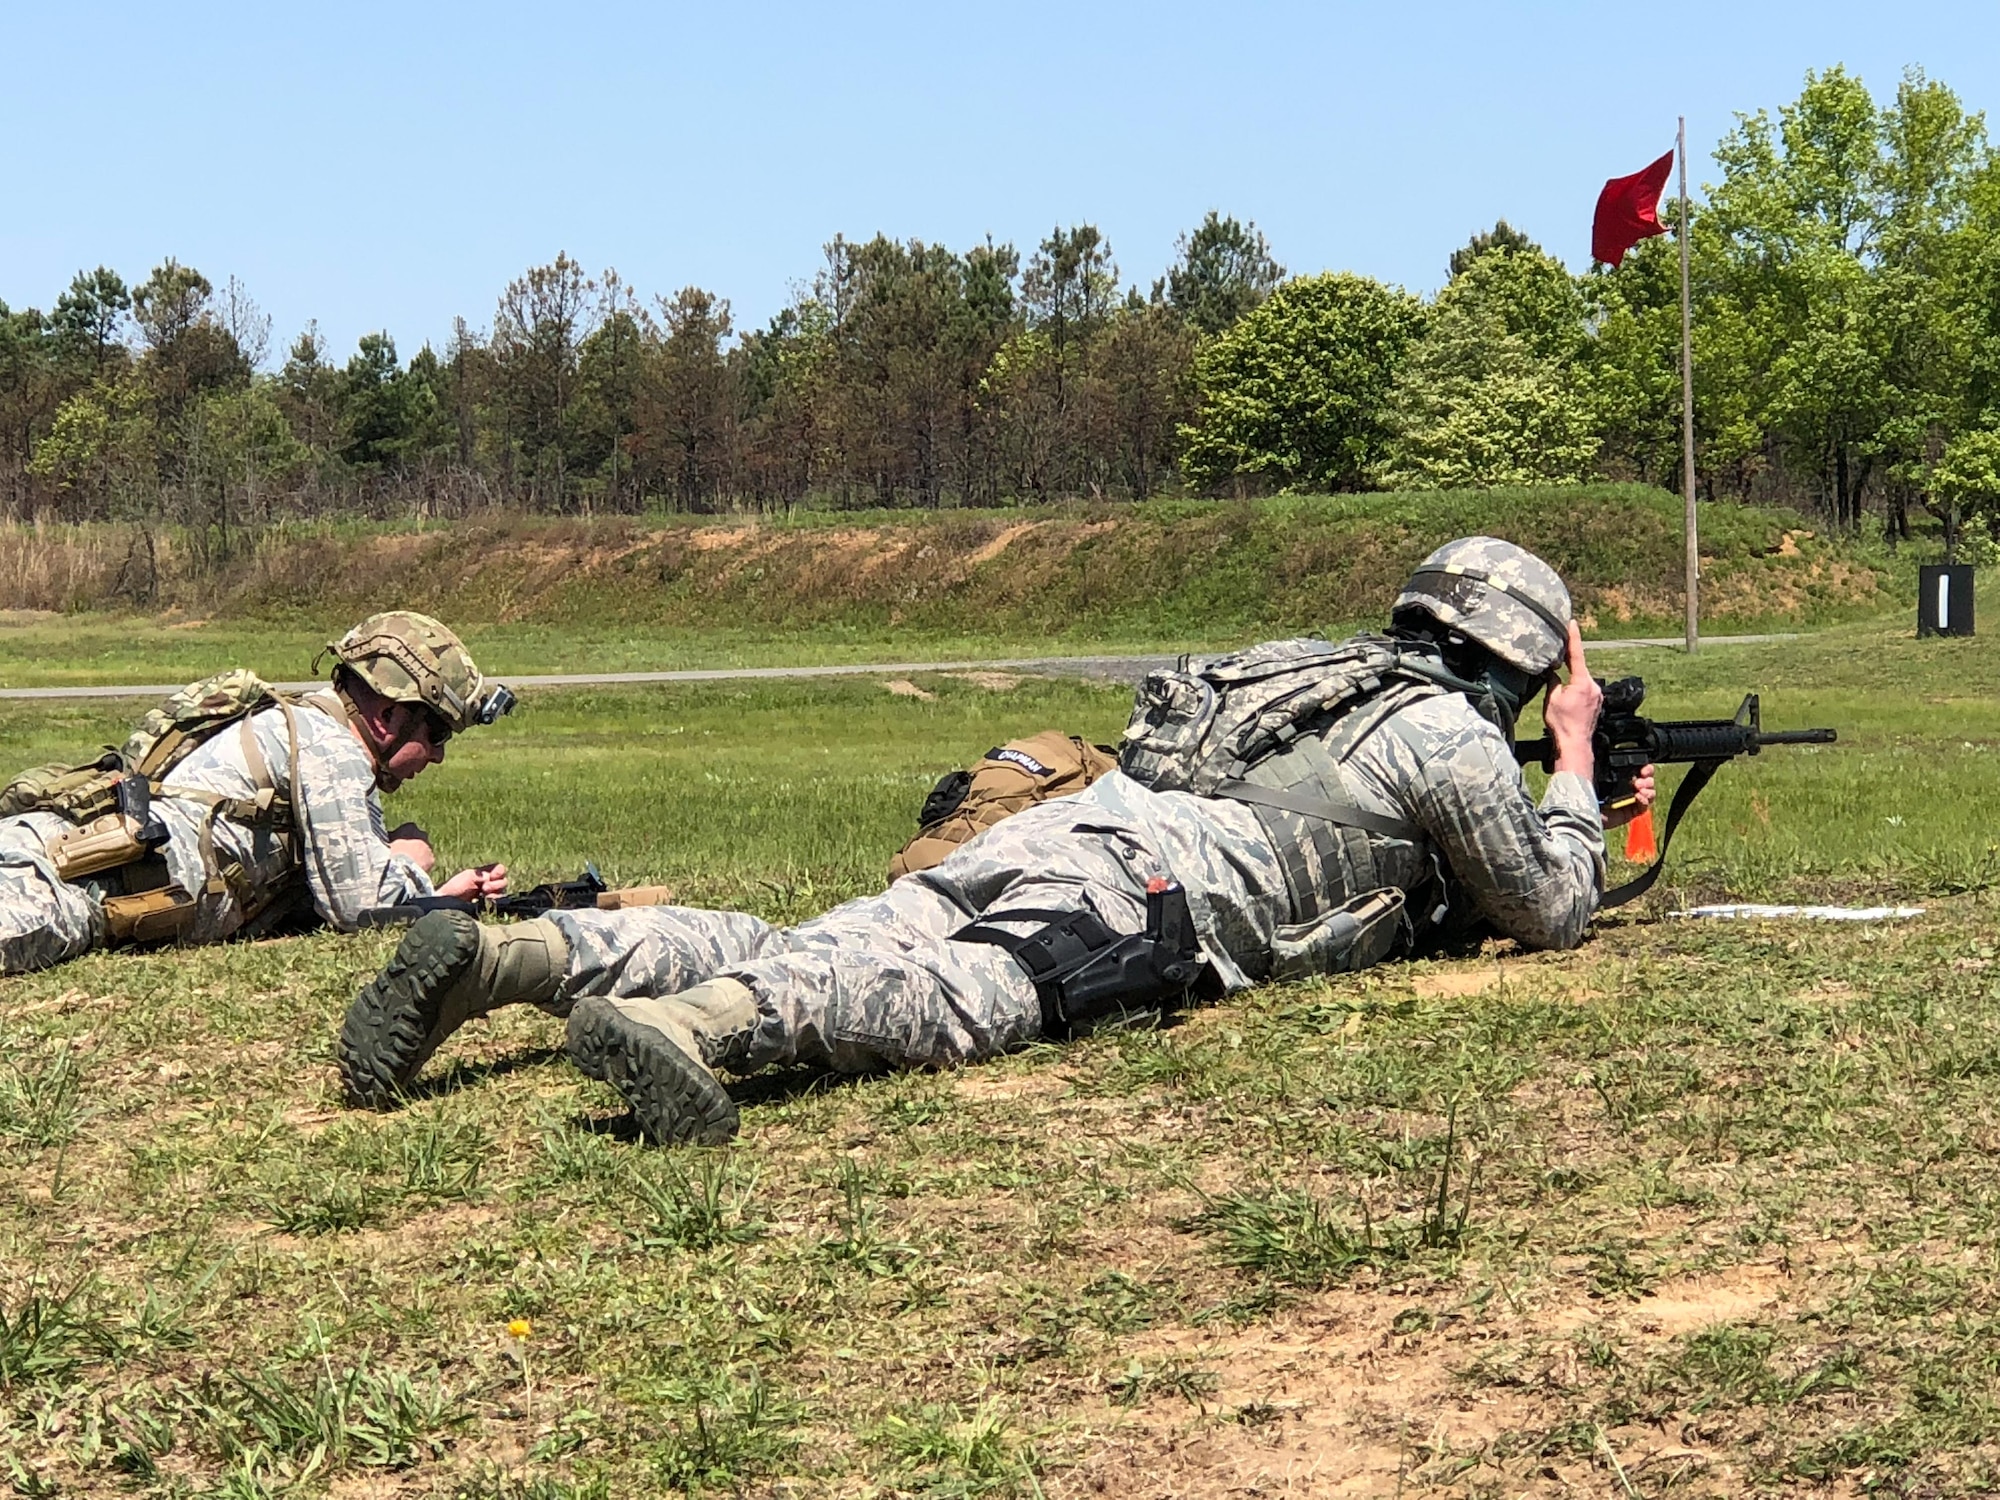 Master Sgt. Christopher Martin, left, 242nd Combat Communications Squadron first sergeant and team captain, and Master Sgt. Michael Chapman, 194th Security Forces Squadron, review the course of fire and practice sighting before the start of the 47th Annual Winston P. Wilson Championship, Robinson Maneuver Training Center, Arkansas, April 29, 2018.  The annual events, hosted by the National Guard Marksmanship Training Center April 29-May 4, 2018, offer Servicemembers from the National Guard and international community an opportunity to test marksmanship skills in a battle-focused environment. (U.S. Air National Guard photo by Staff Sgt. Hope Funderburk)